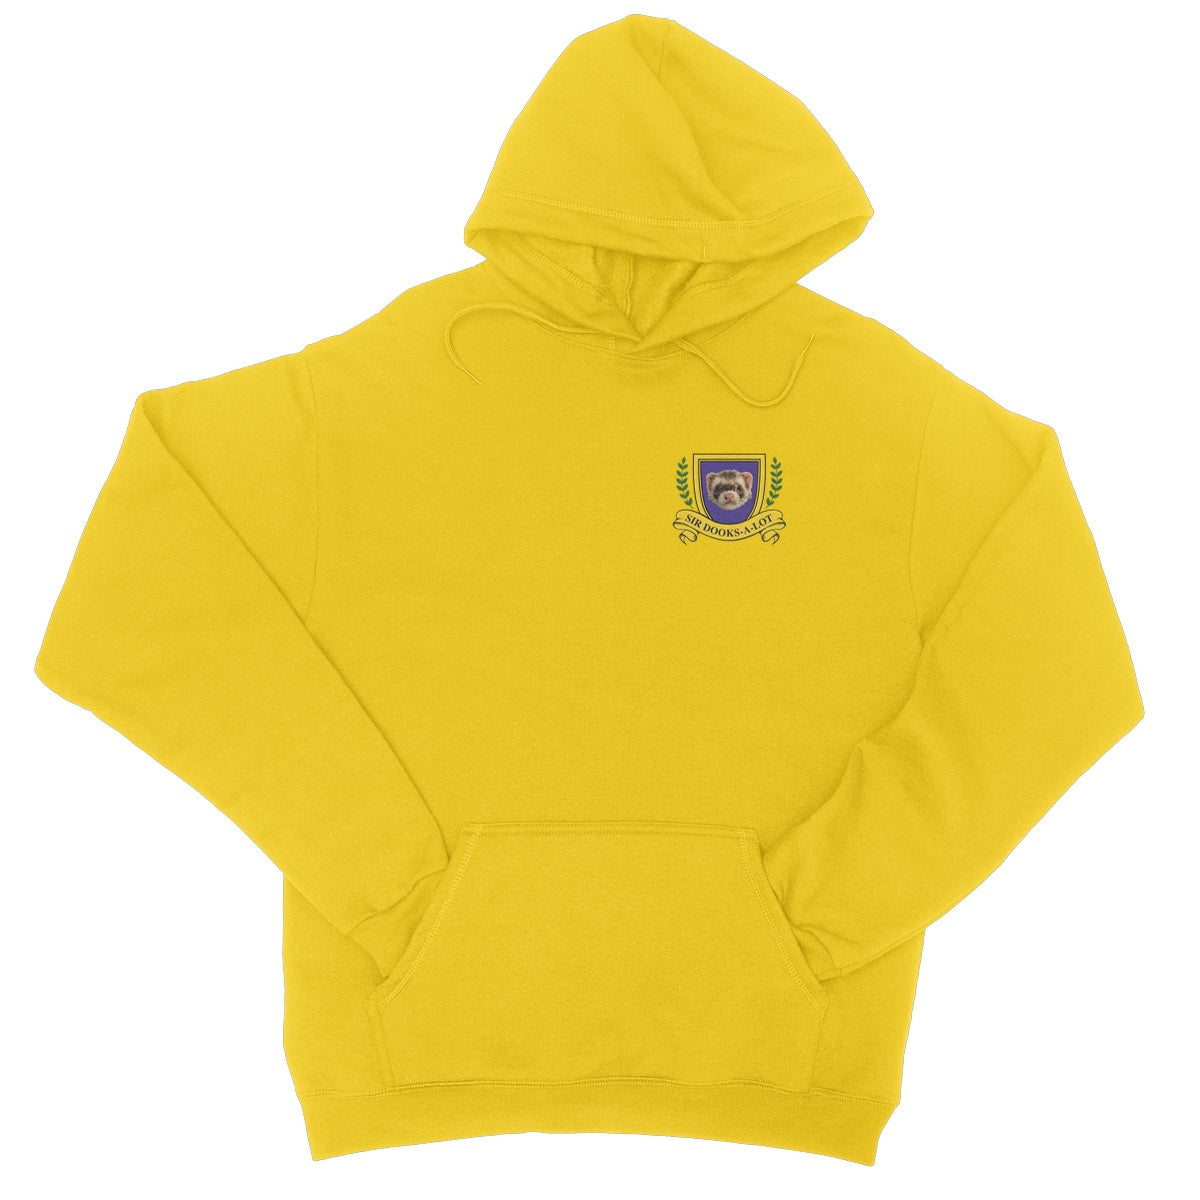 Sir Dooks-a-Lot College Hoodie